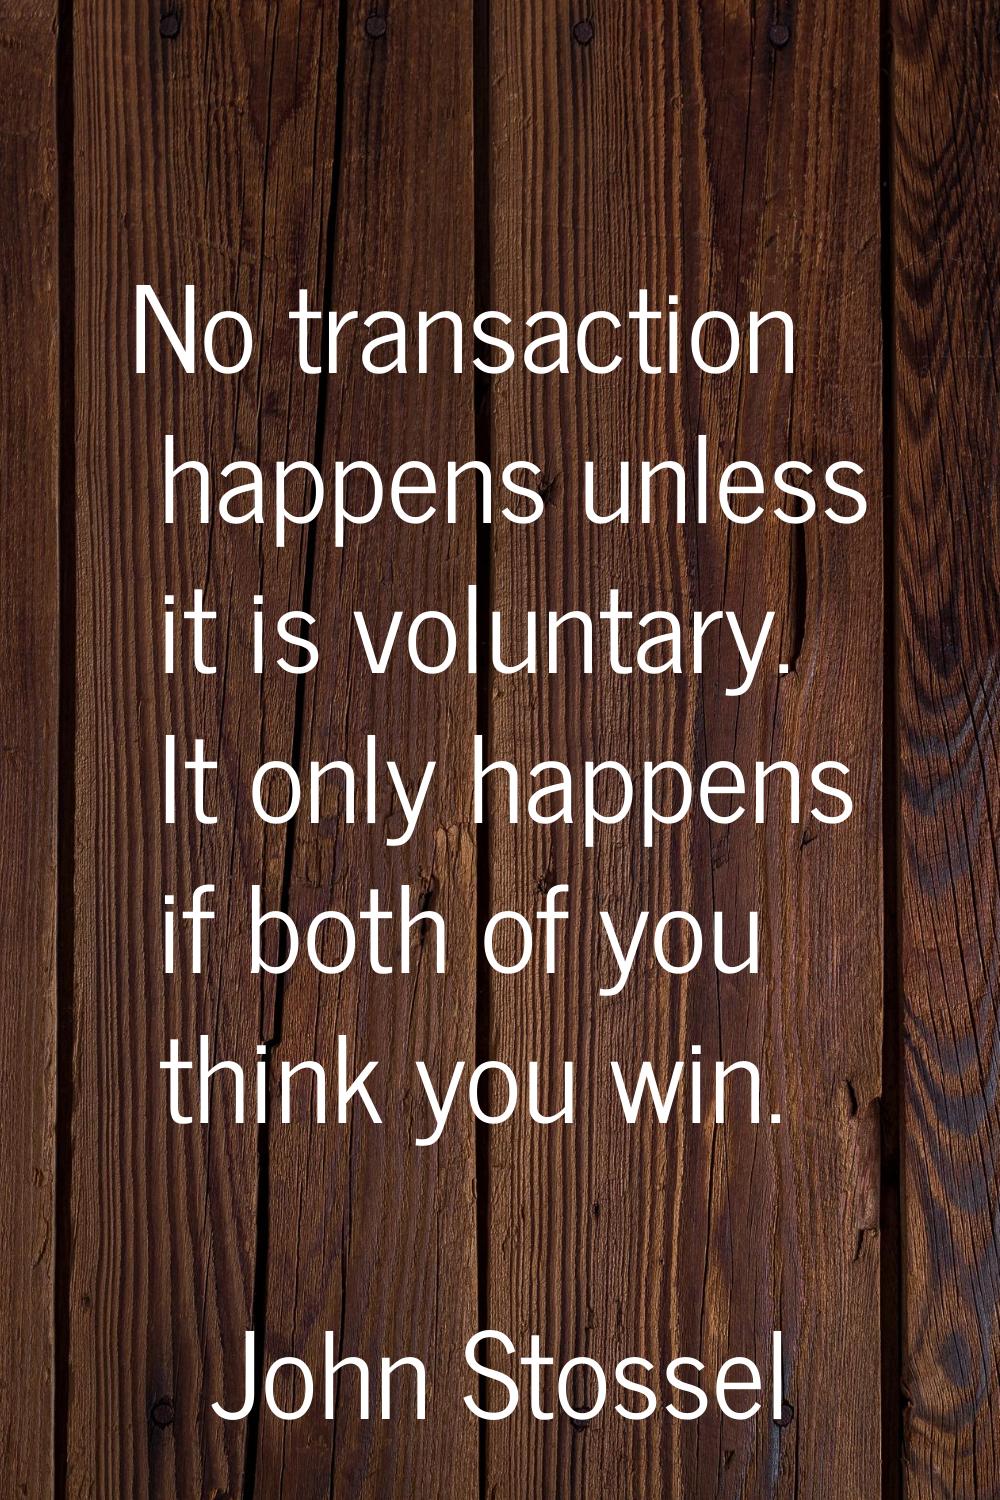 No transaction happens unless it is voluntary. It only happens if both of you think you win.